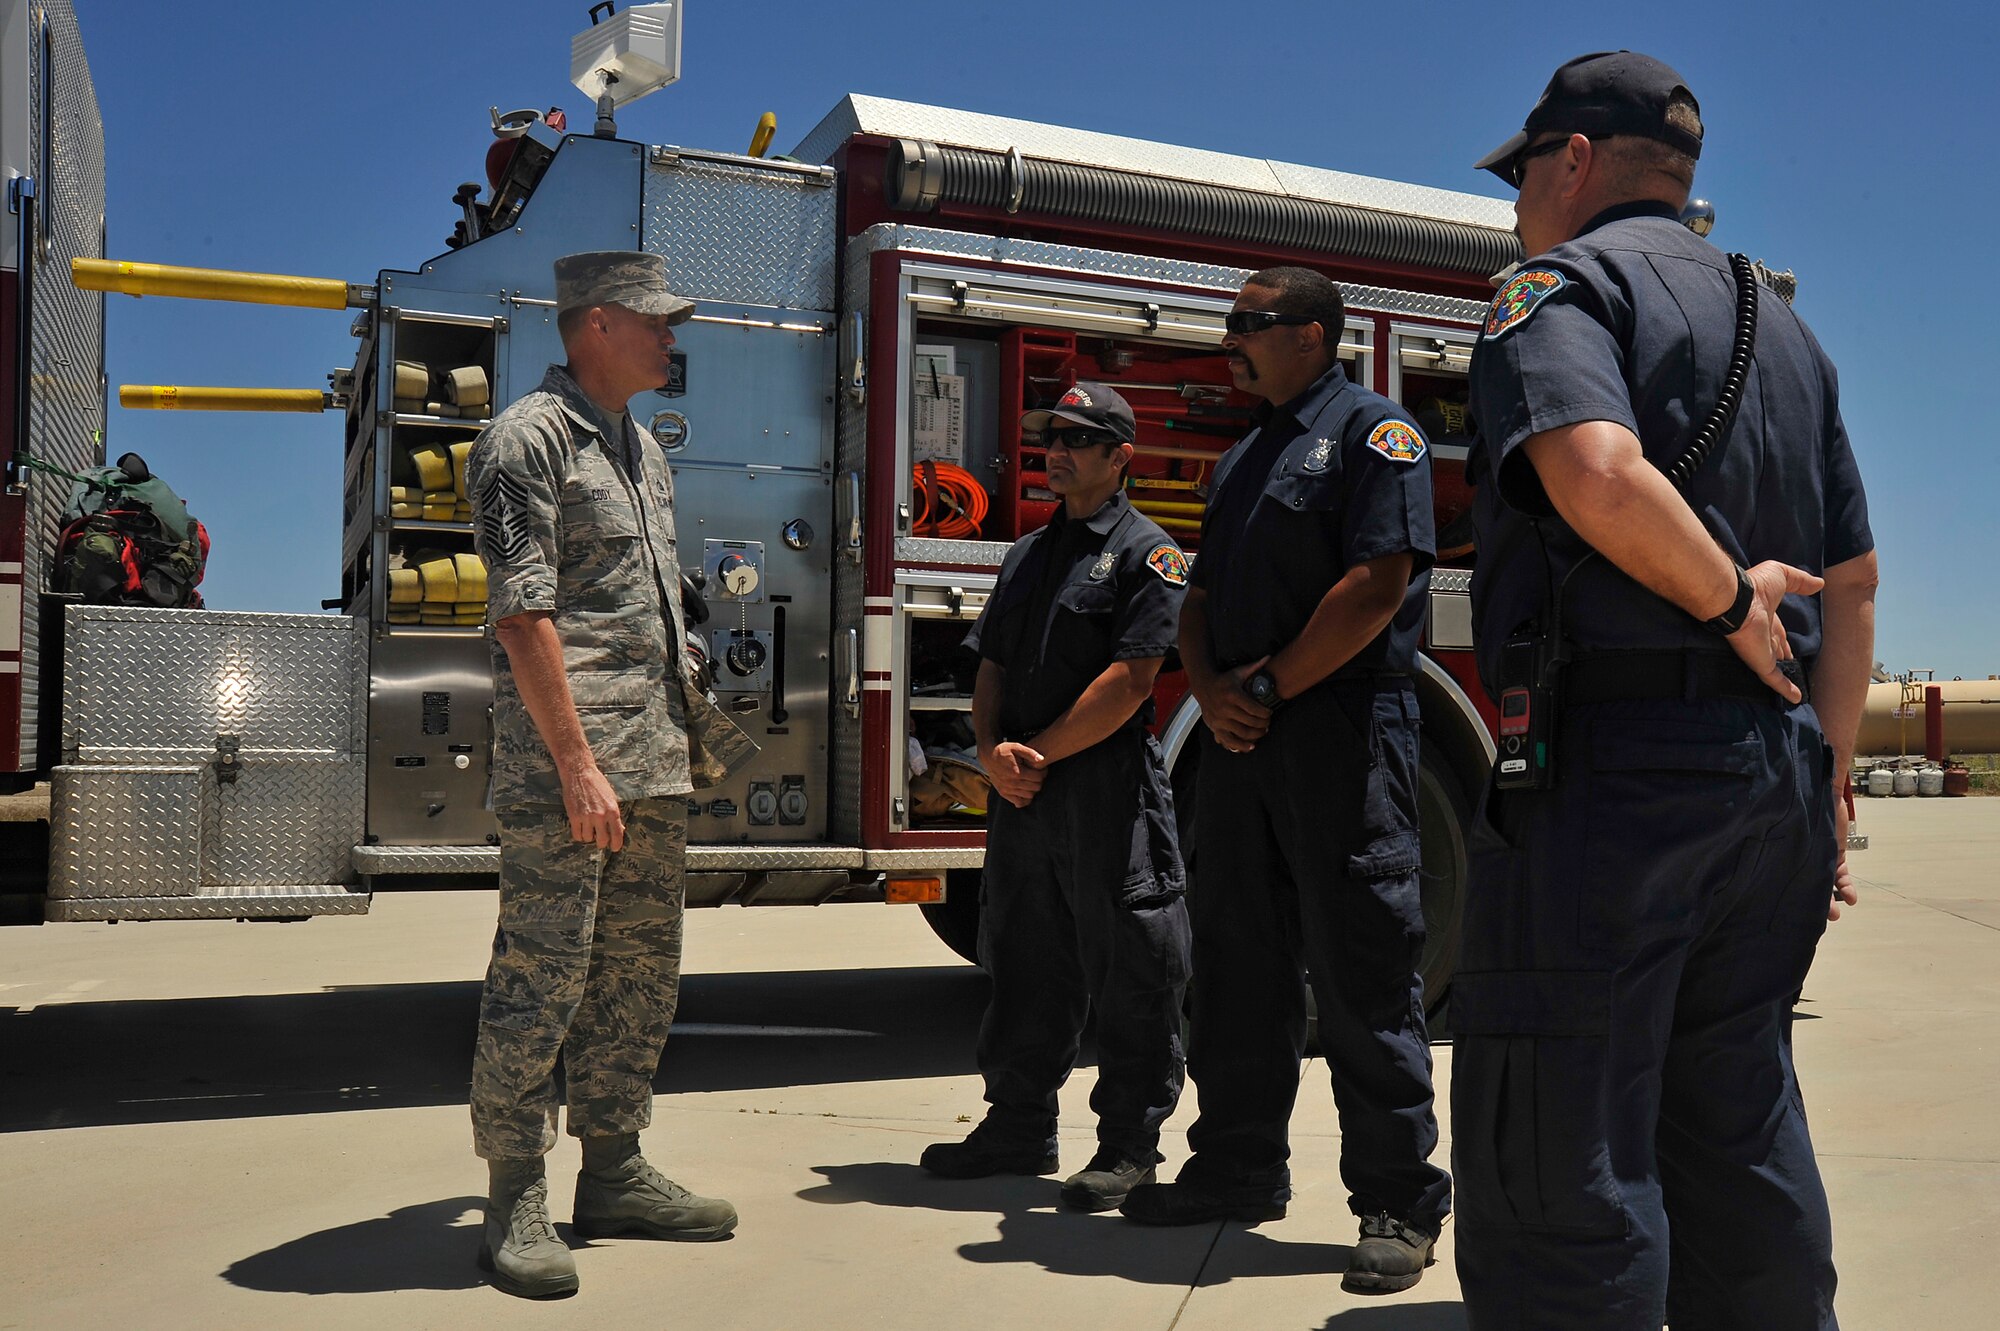 Chief Master Sgt. of the Air Force, James A. Cody, speaks with Vandenberg firefighters during a tour that showcased the 30th Mission Support Group capabilities, July 8, 2014, Vandenberg Air Force Base, Calif. During the tour Cody also had the opportunity to meet the Hot Shots, Vandenberg's team of firefighters, specializing in fighting wildfires. (U.S. Air Force photo by Michael Peterson/Released)